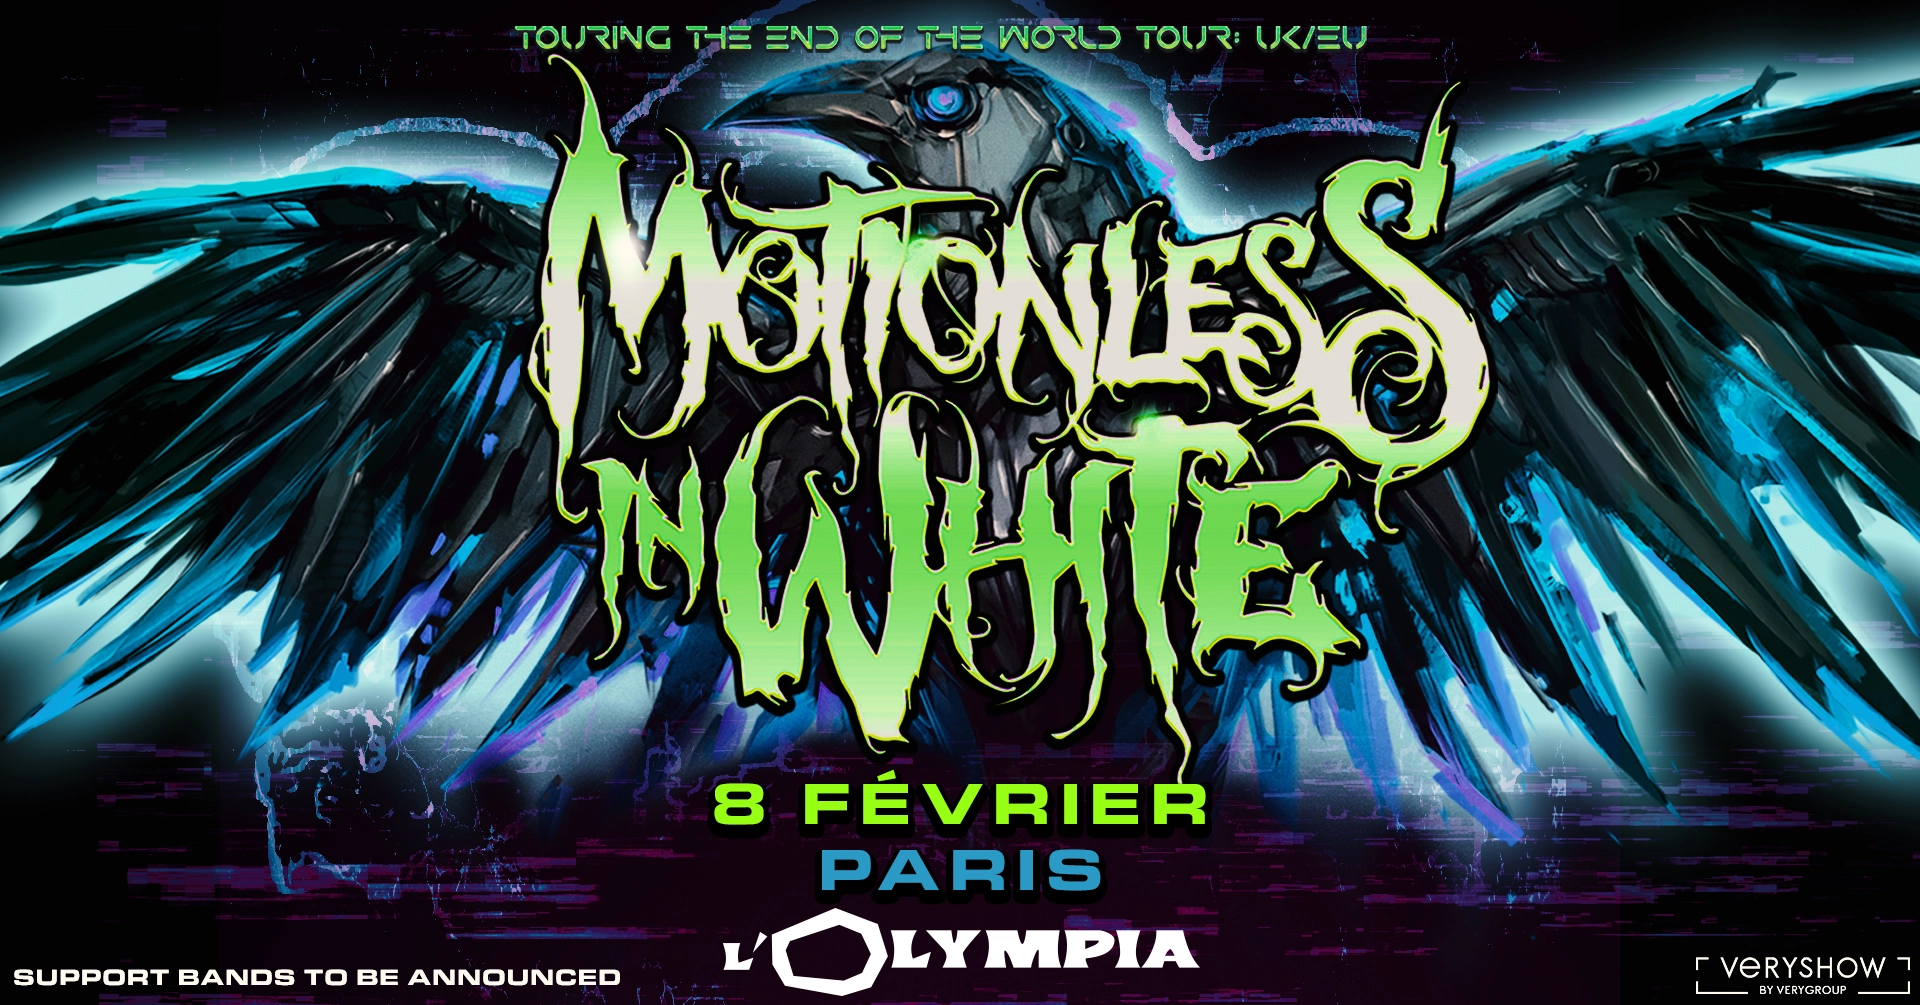 Motionless In White at Olympia Tickets